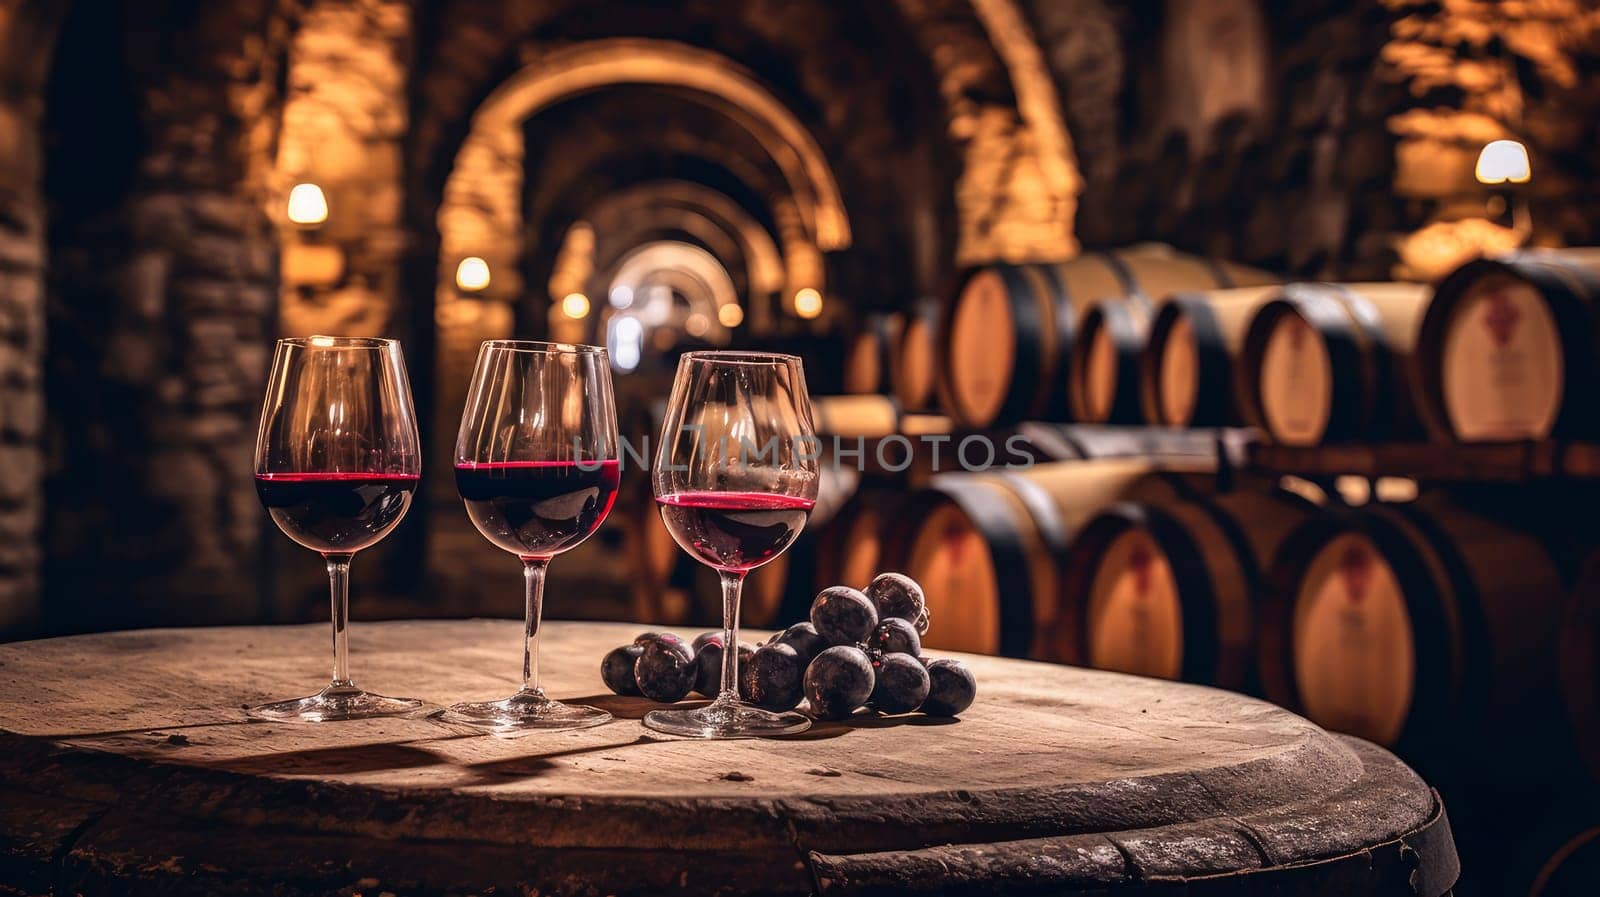 Wine cellar with wine barrels, modern and clean with oak barrels for aging and transport. by Alla_Yurtayeva